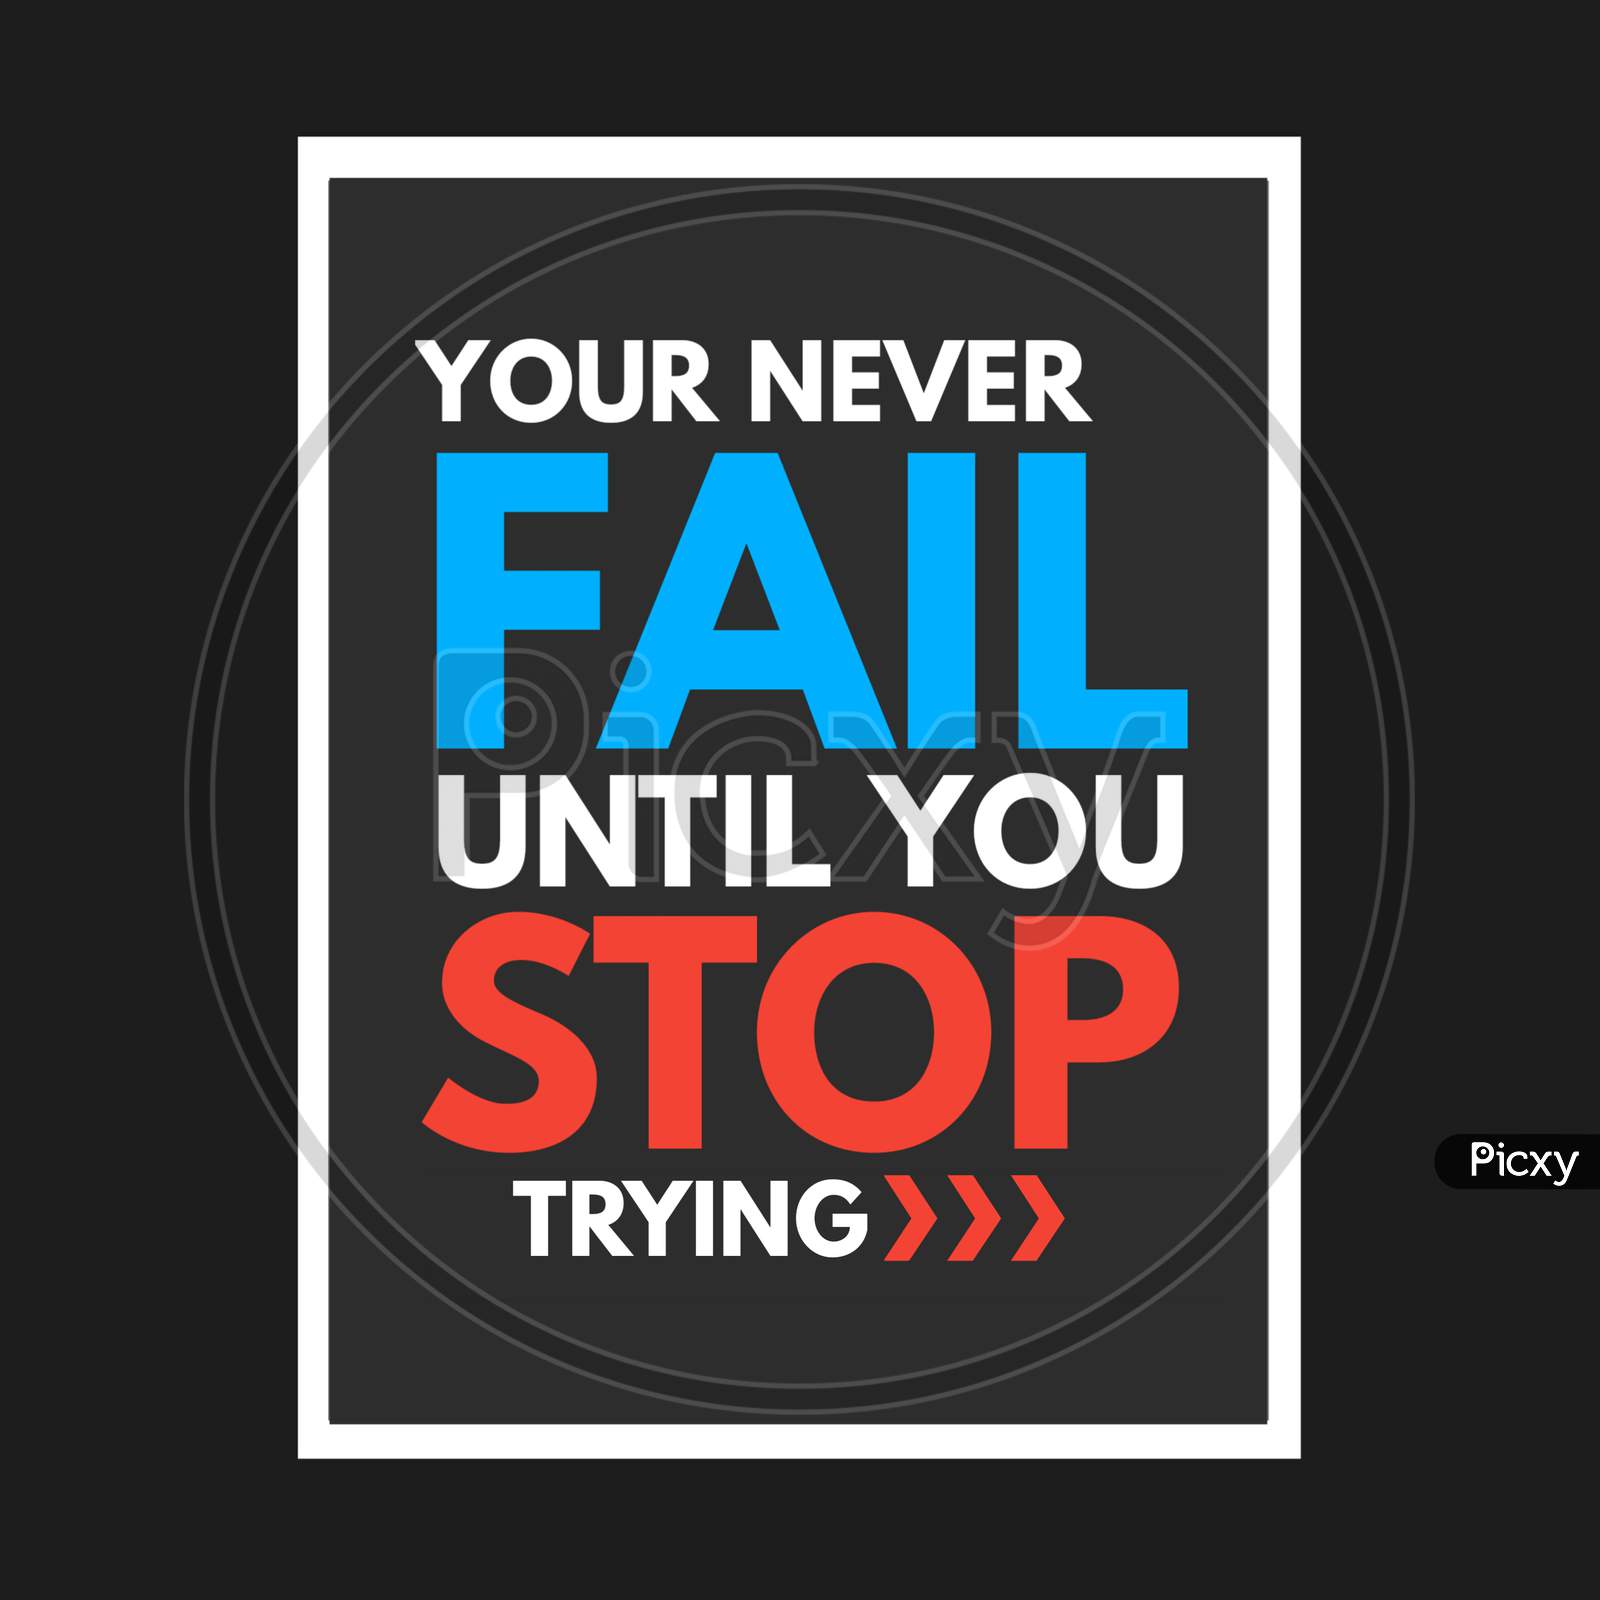 You Never Fail Until You Stop Trying (black background with colorful fonts)